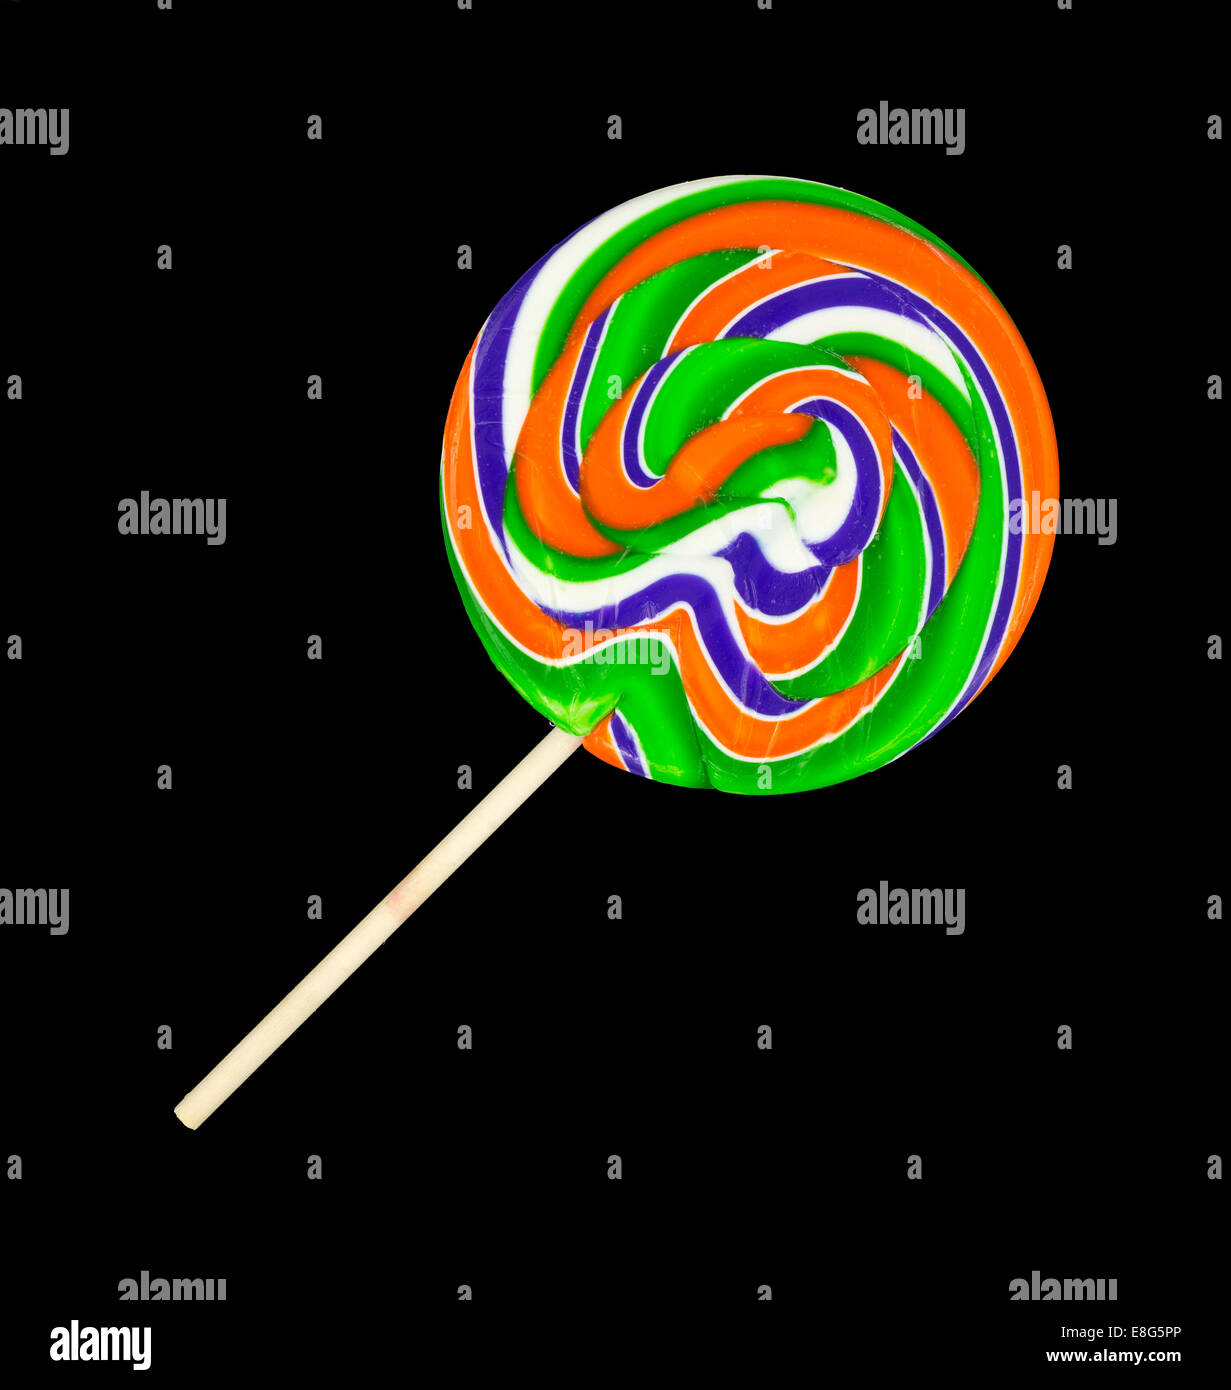 A very colorful orange, green, blue and white lollipop with a wood stick handle on a black background. Stock Photo